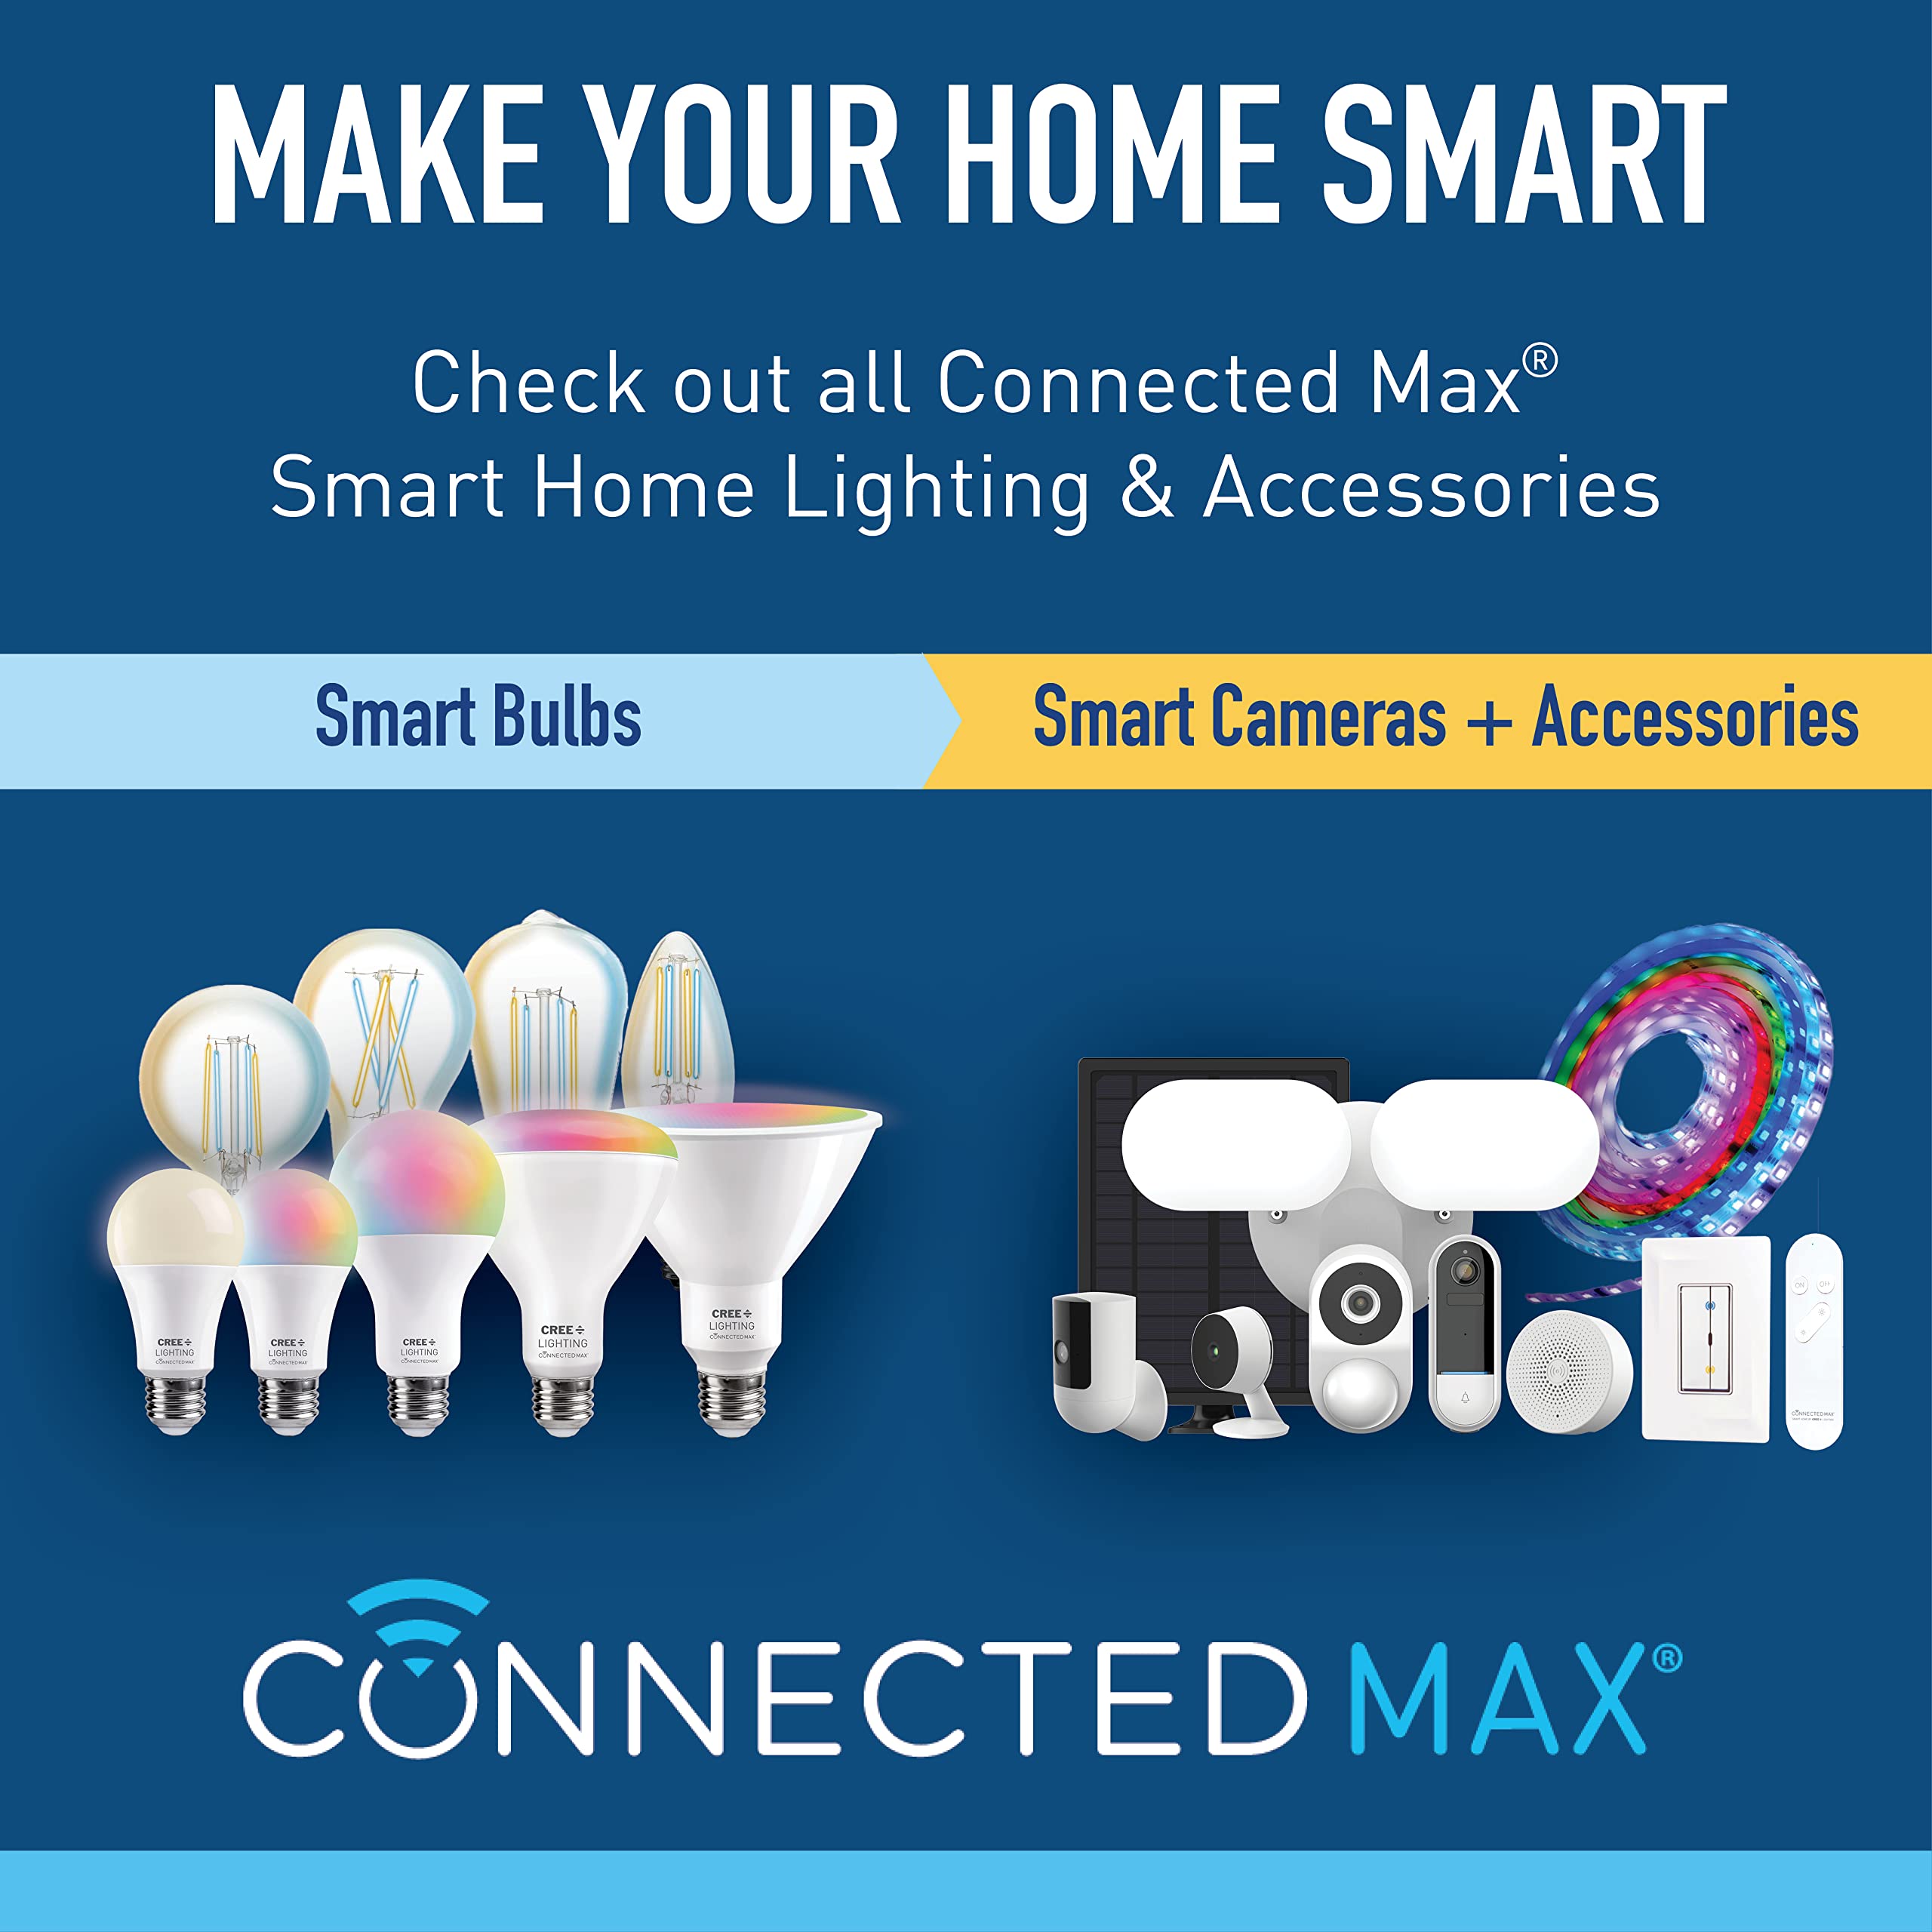 Cree Lighting Connected Max Smart Led Bulb Par38 Outdoor Flood Tunable White + Color Changing, 2.4 Ghz, Compatible With Alexa And Google Home, No Hub Required, Bluetooth + Wifi, Pack of 4